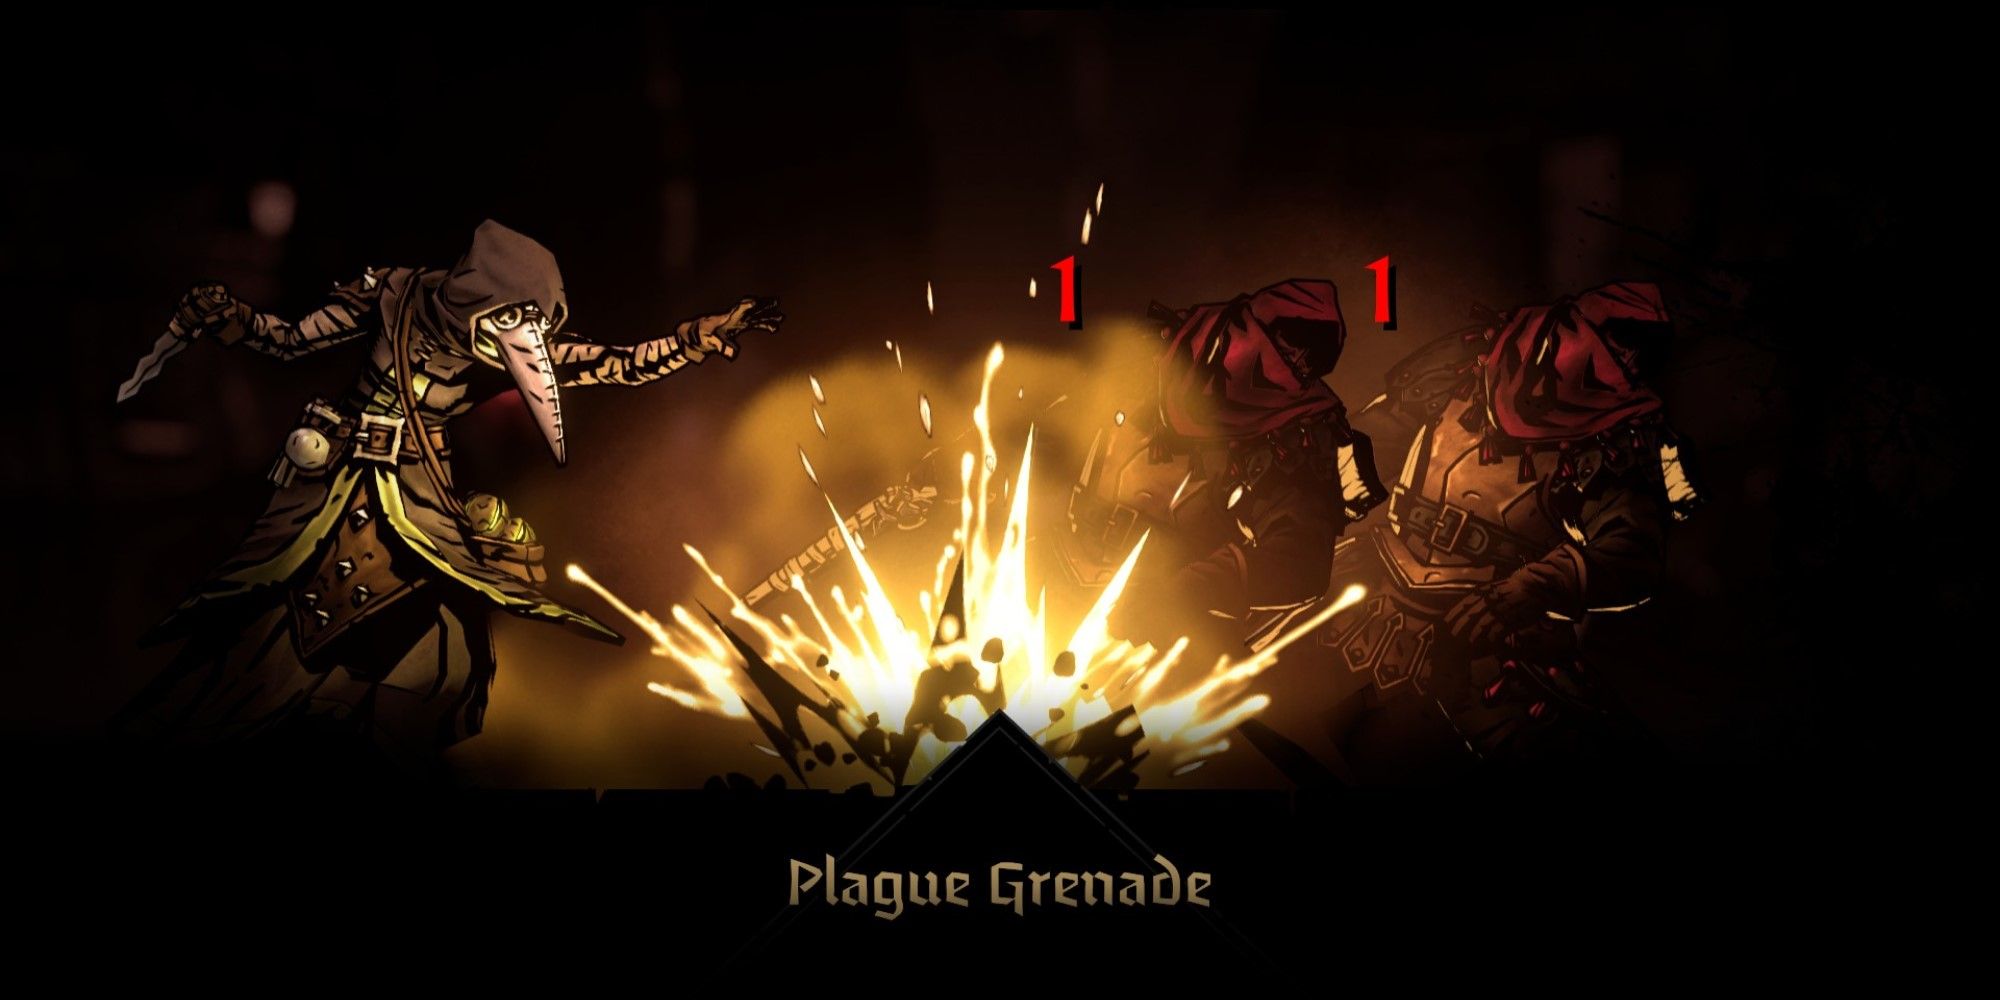 A screenshot of the Plague Grenade Skill being used in Darkest Dungeon 2